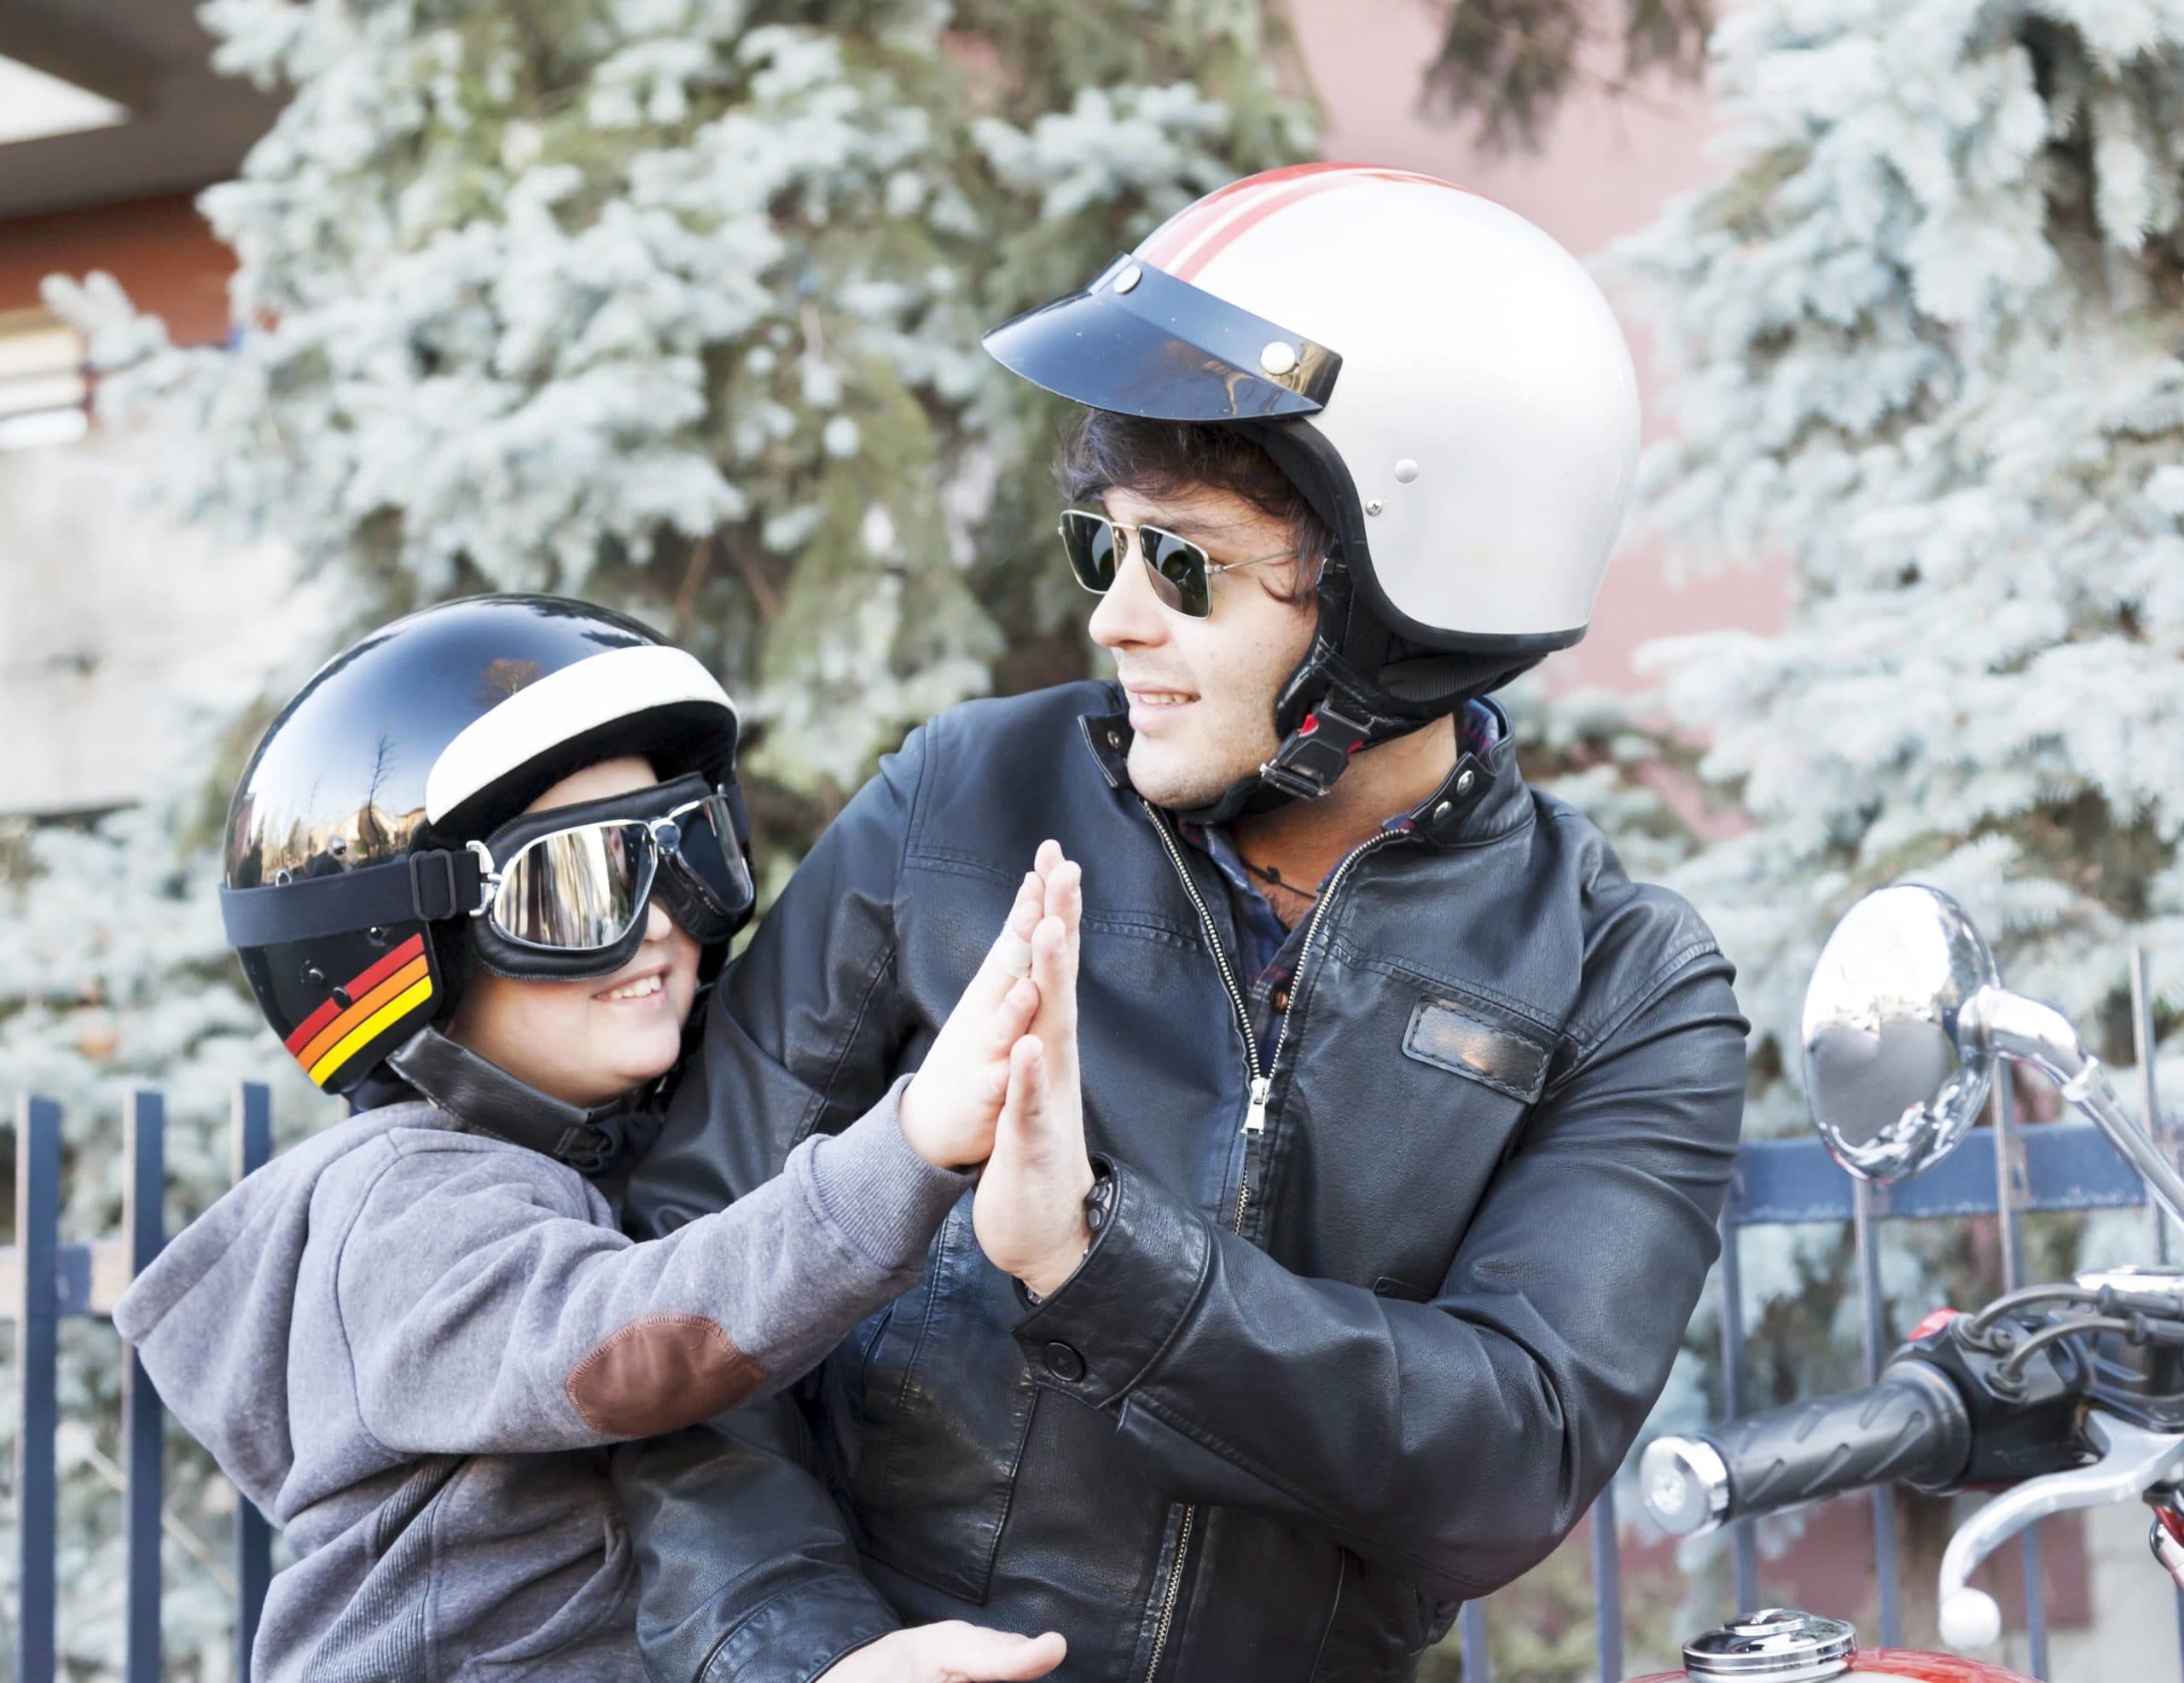 Kid on motorcycle wearing helmet and goggles for safety.